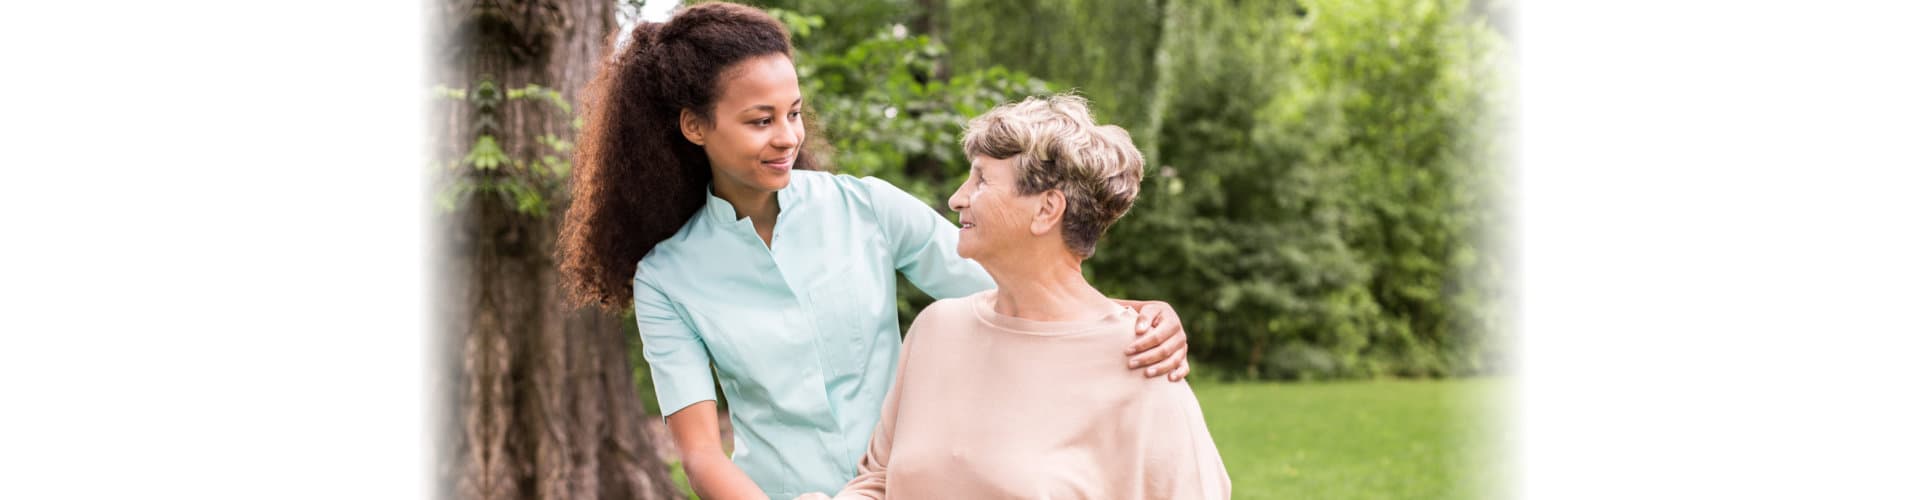 caregiver and senior woman smiling at each other